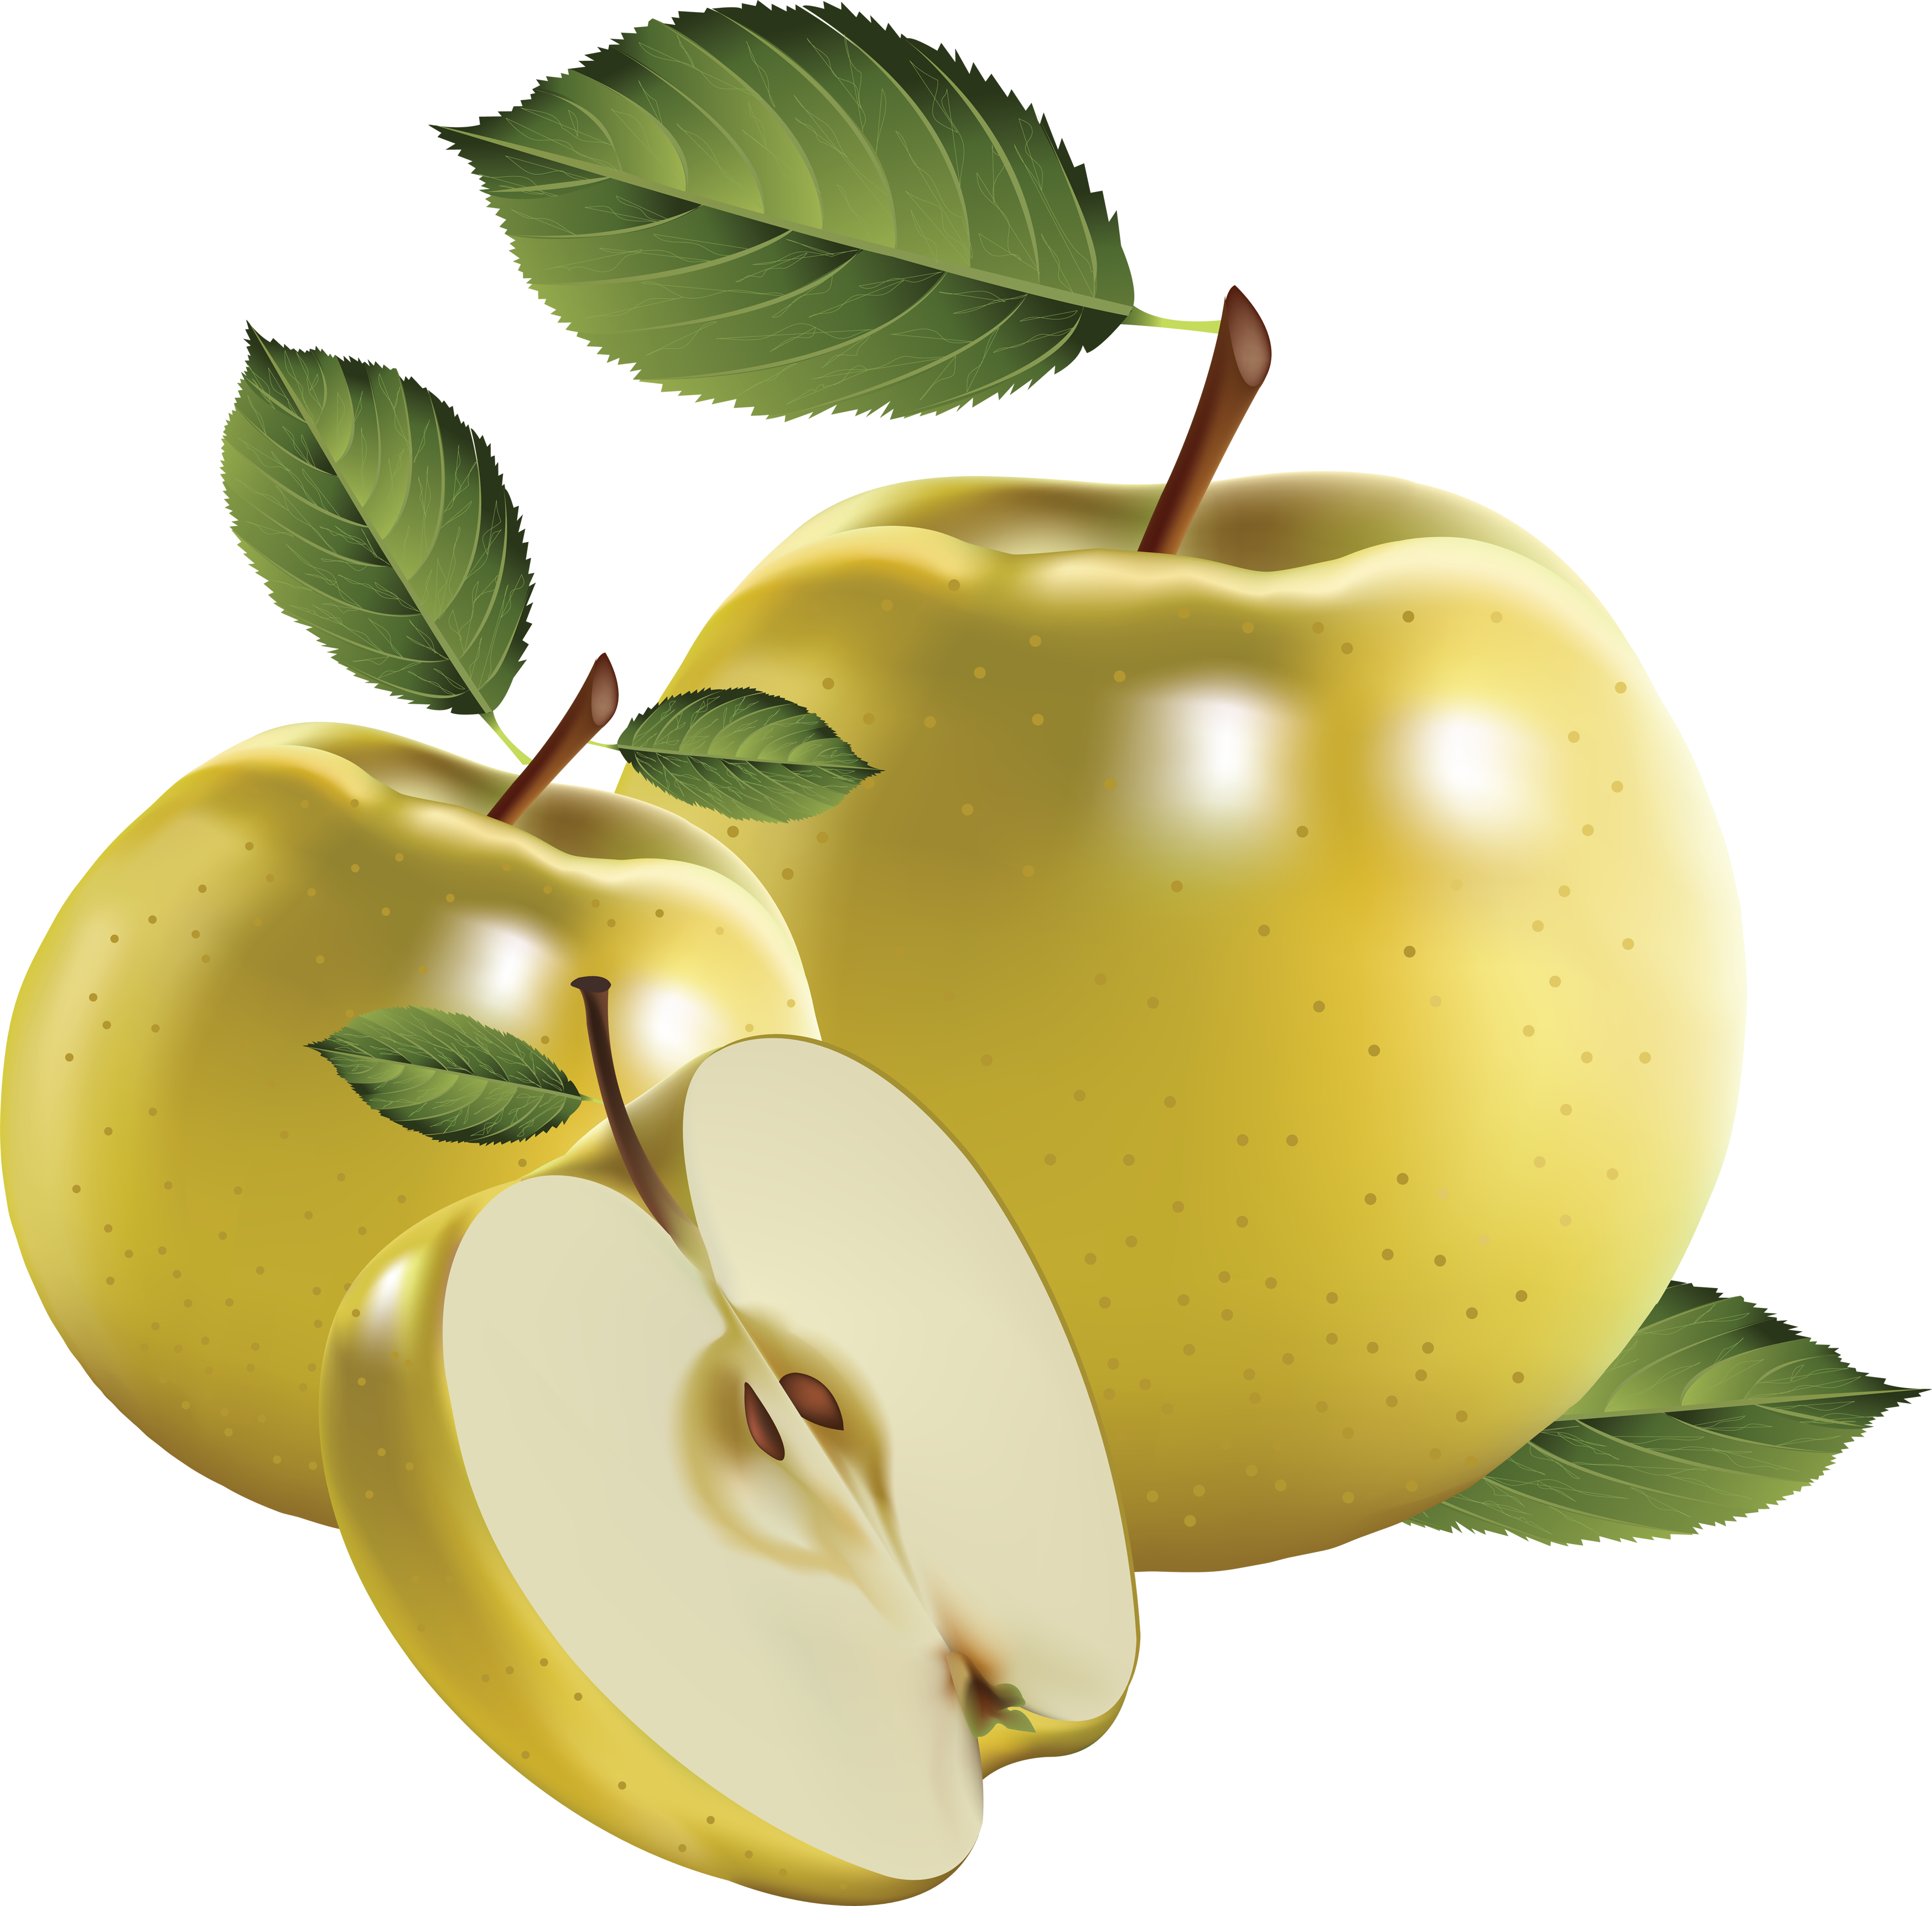 Download PNG image: Yellow PNG apple image, free apple PNG picture ...